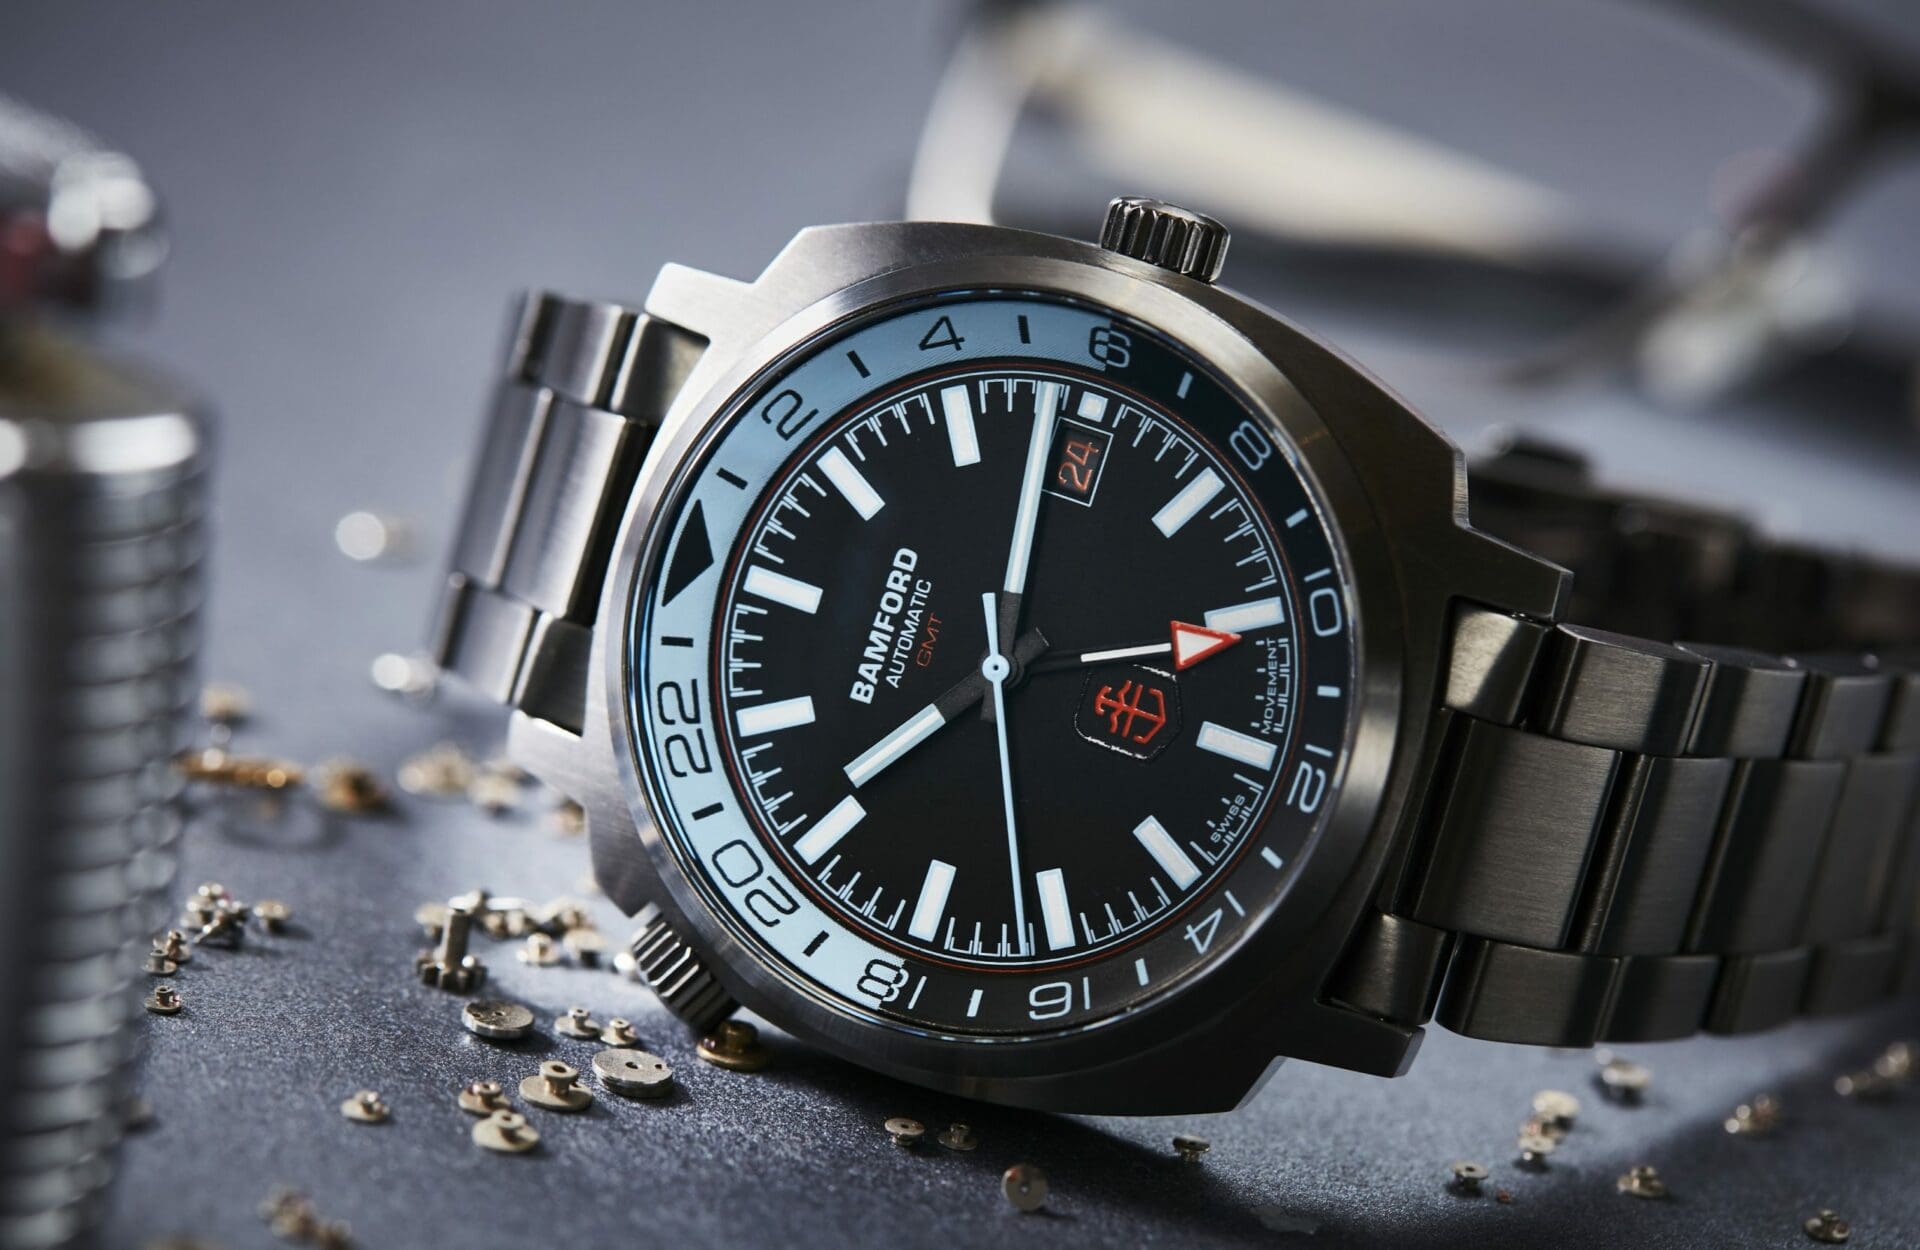 FRIDAY WIND DOWN: The FWD is back in 2021 and so are heaps of new watches